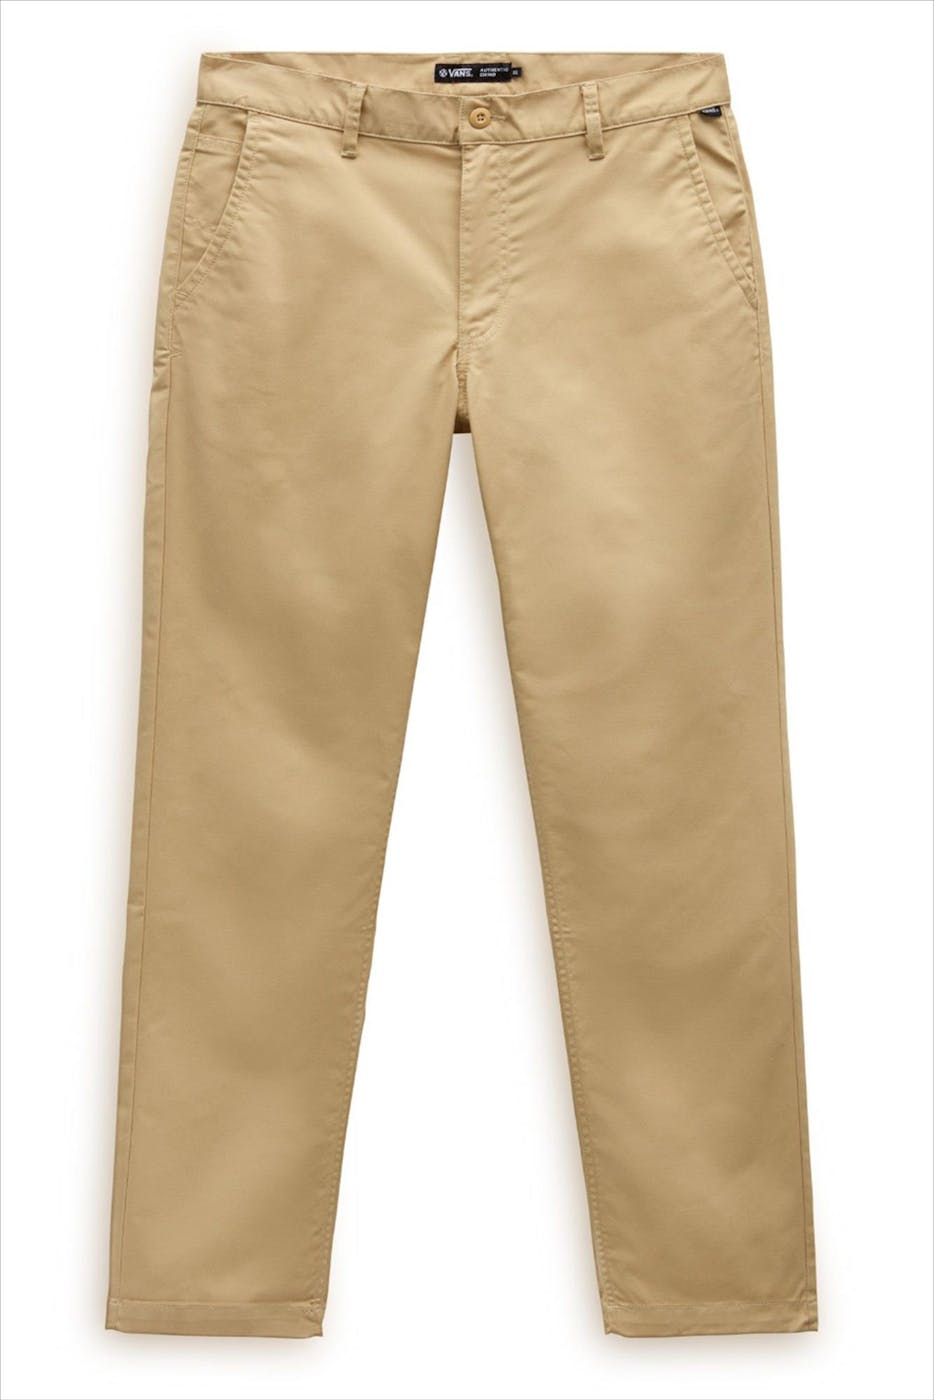 Vans  - Beige Authenic Relaxed chino